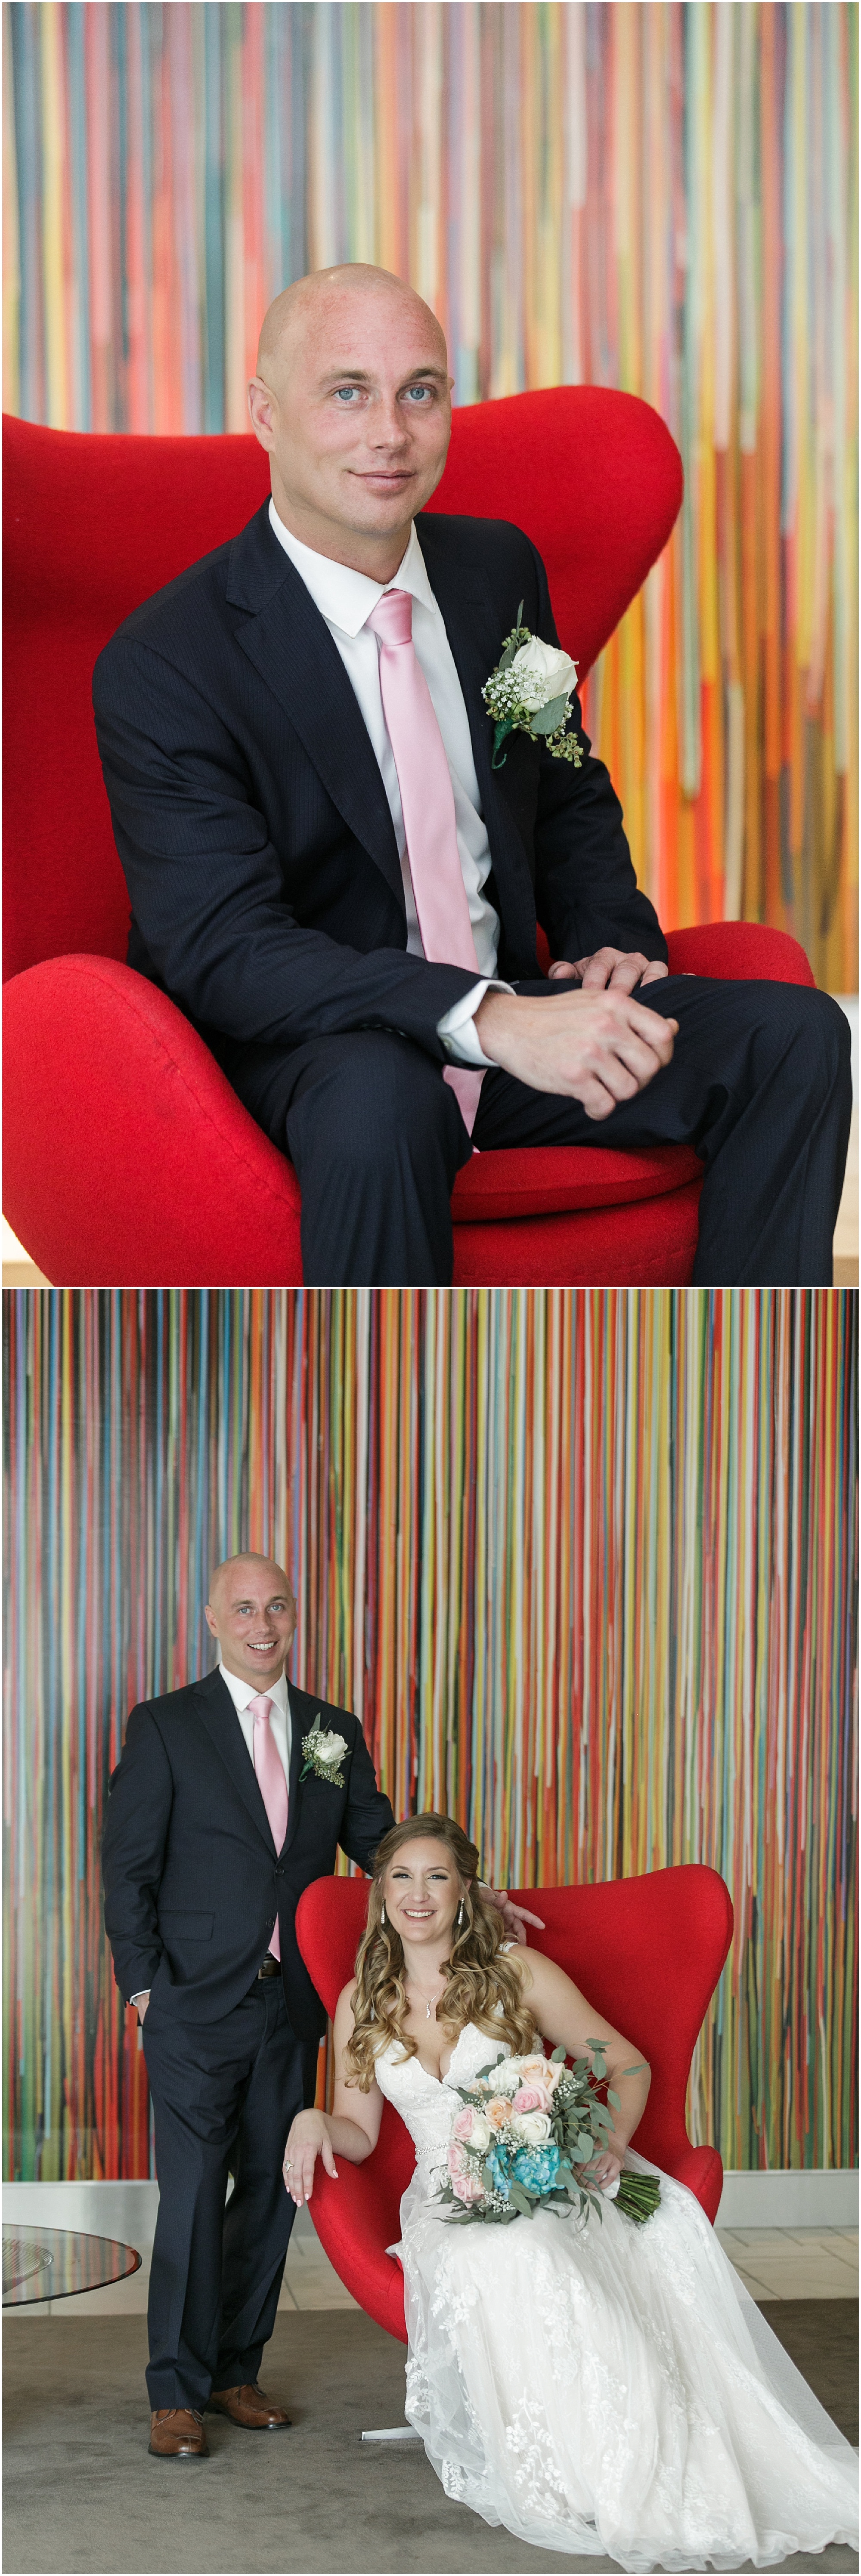 Groom sitting in a red modern chair and then joined by his bride to take photos in front of a colorful striped wall. 